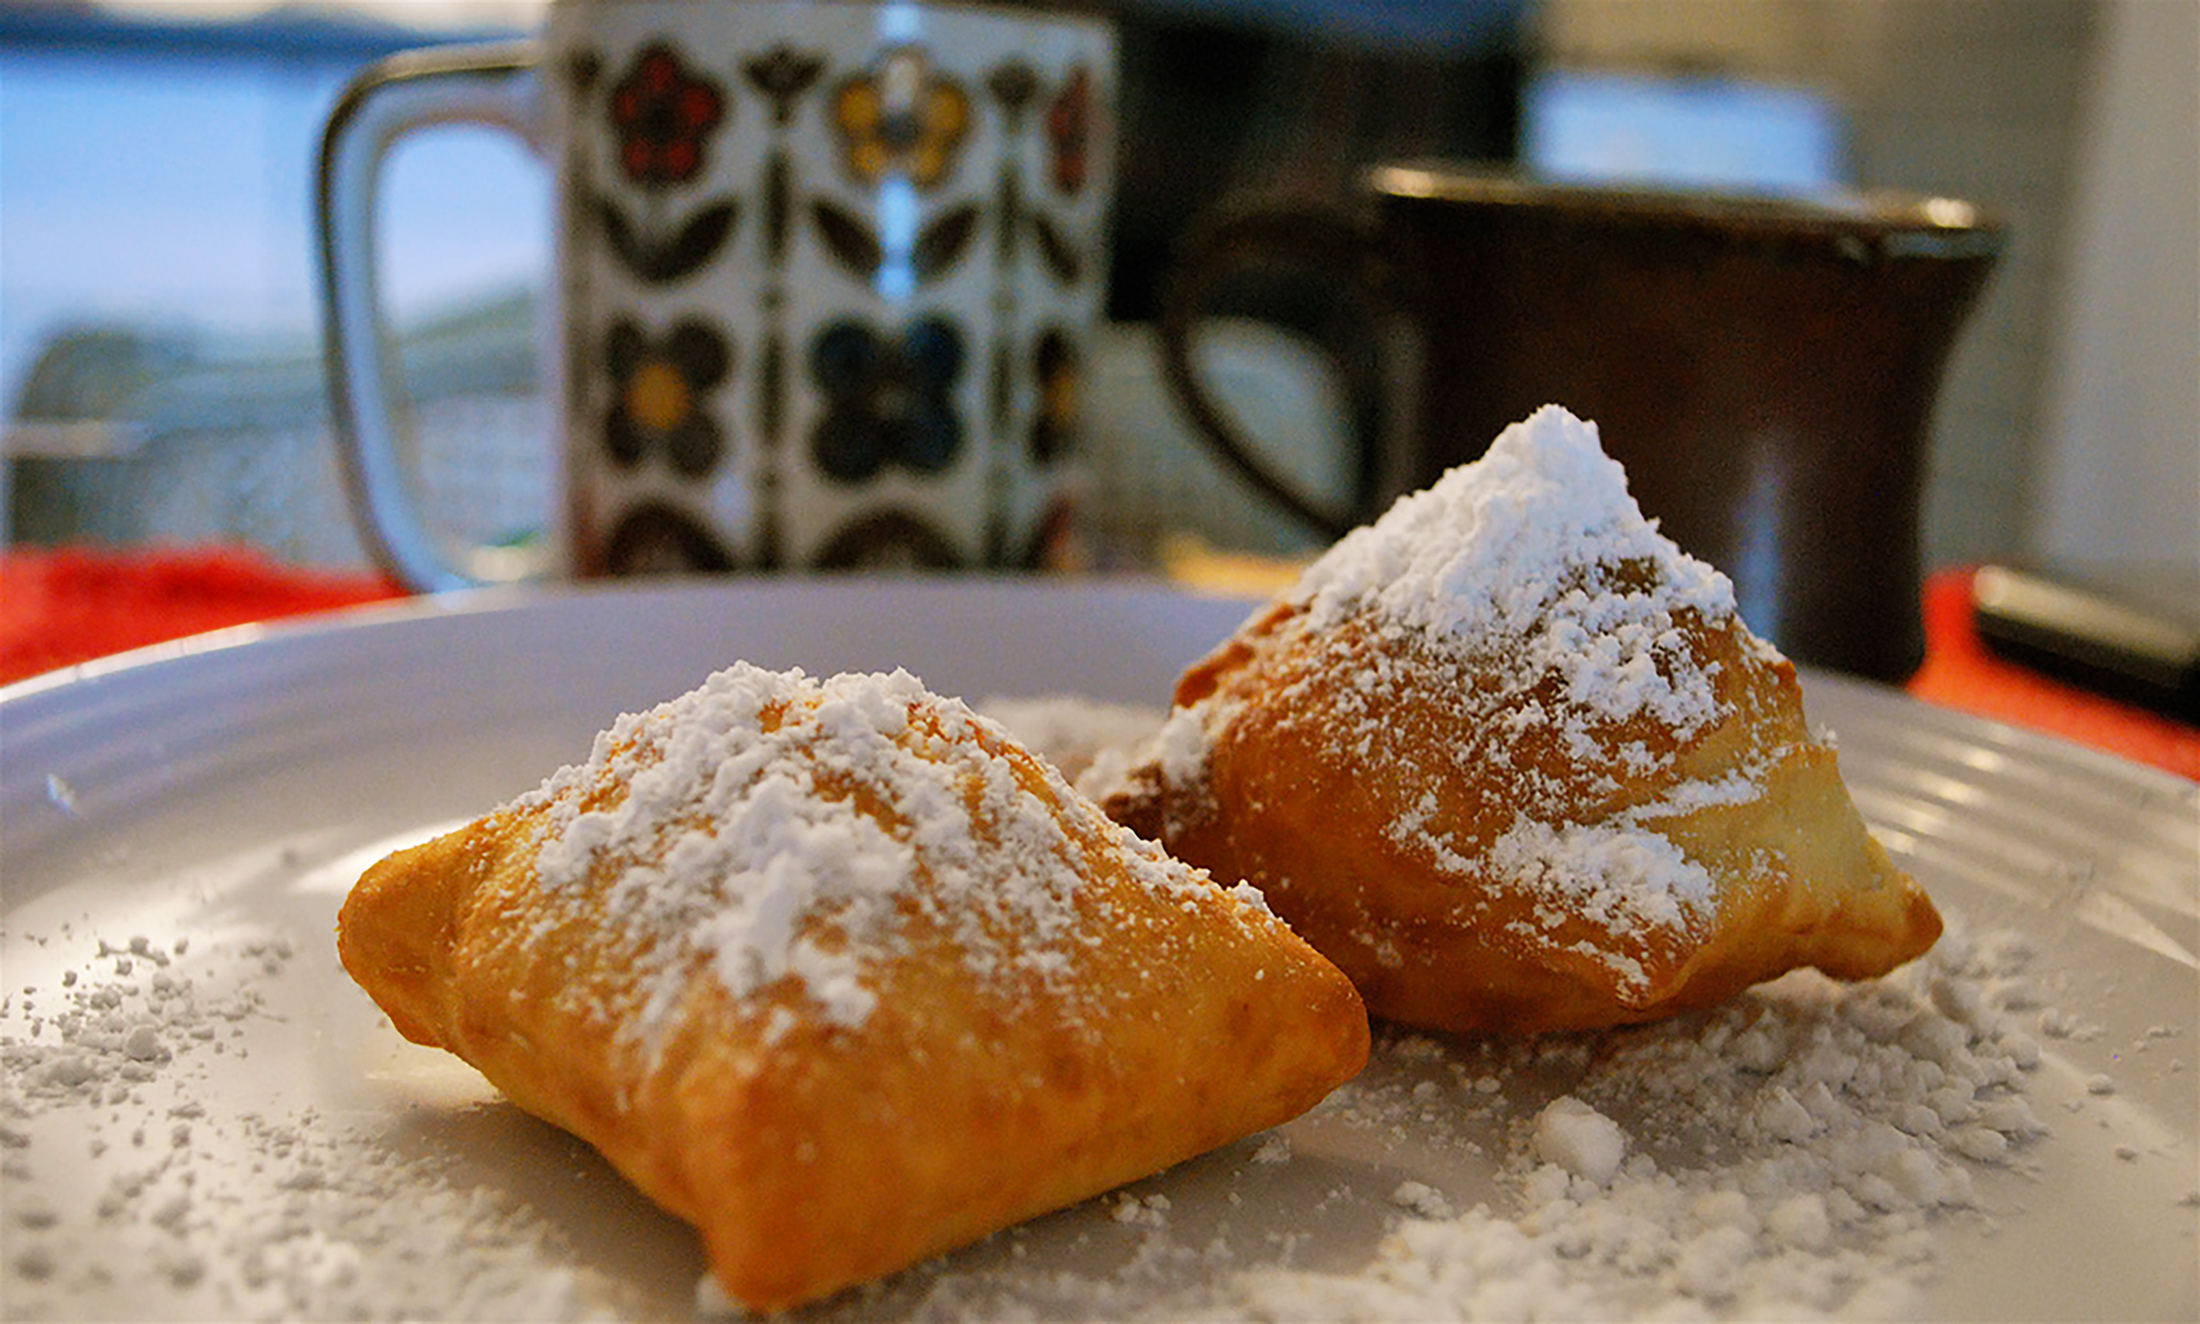 Cafe du Monde beignets and coffee. Photo was shared on Flickr Creative Commons by Valerie Hinojosa.